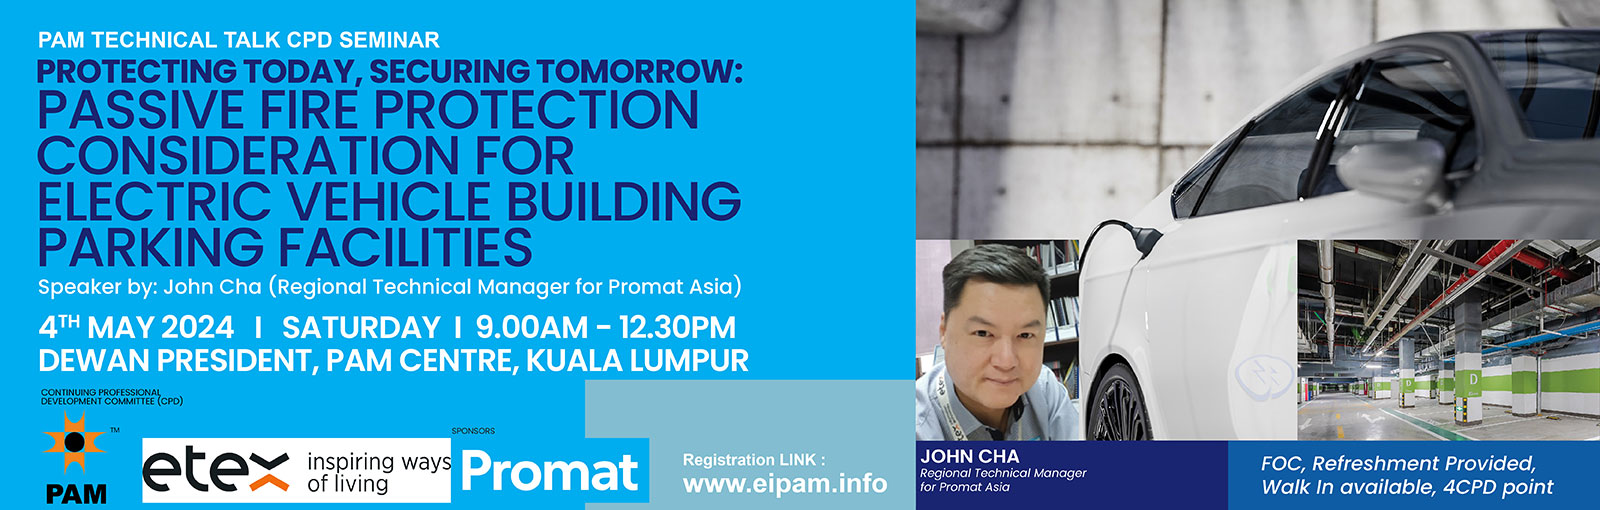 PAM TECHNICAL TALK CPD SEMINAR : PROTECTING TODAY, SECURING TOMORROW